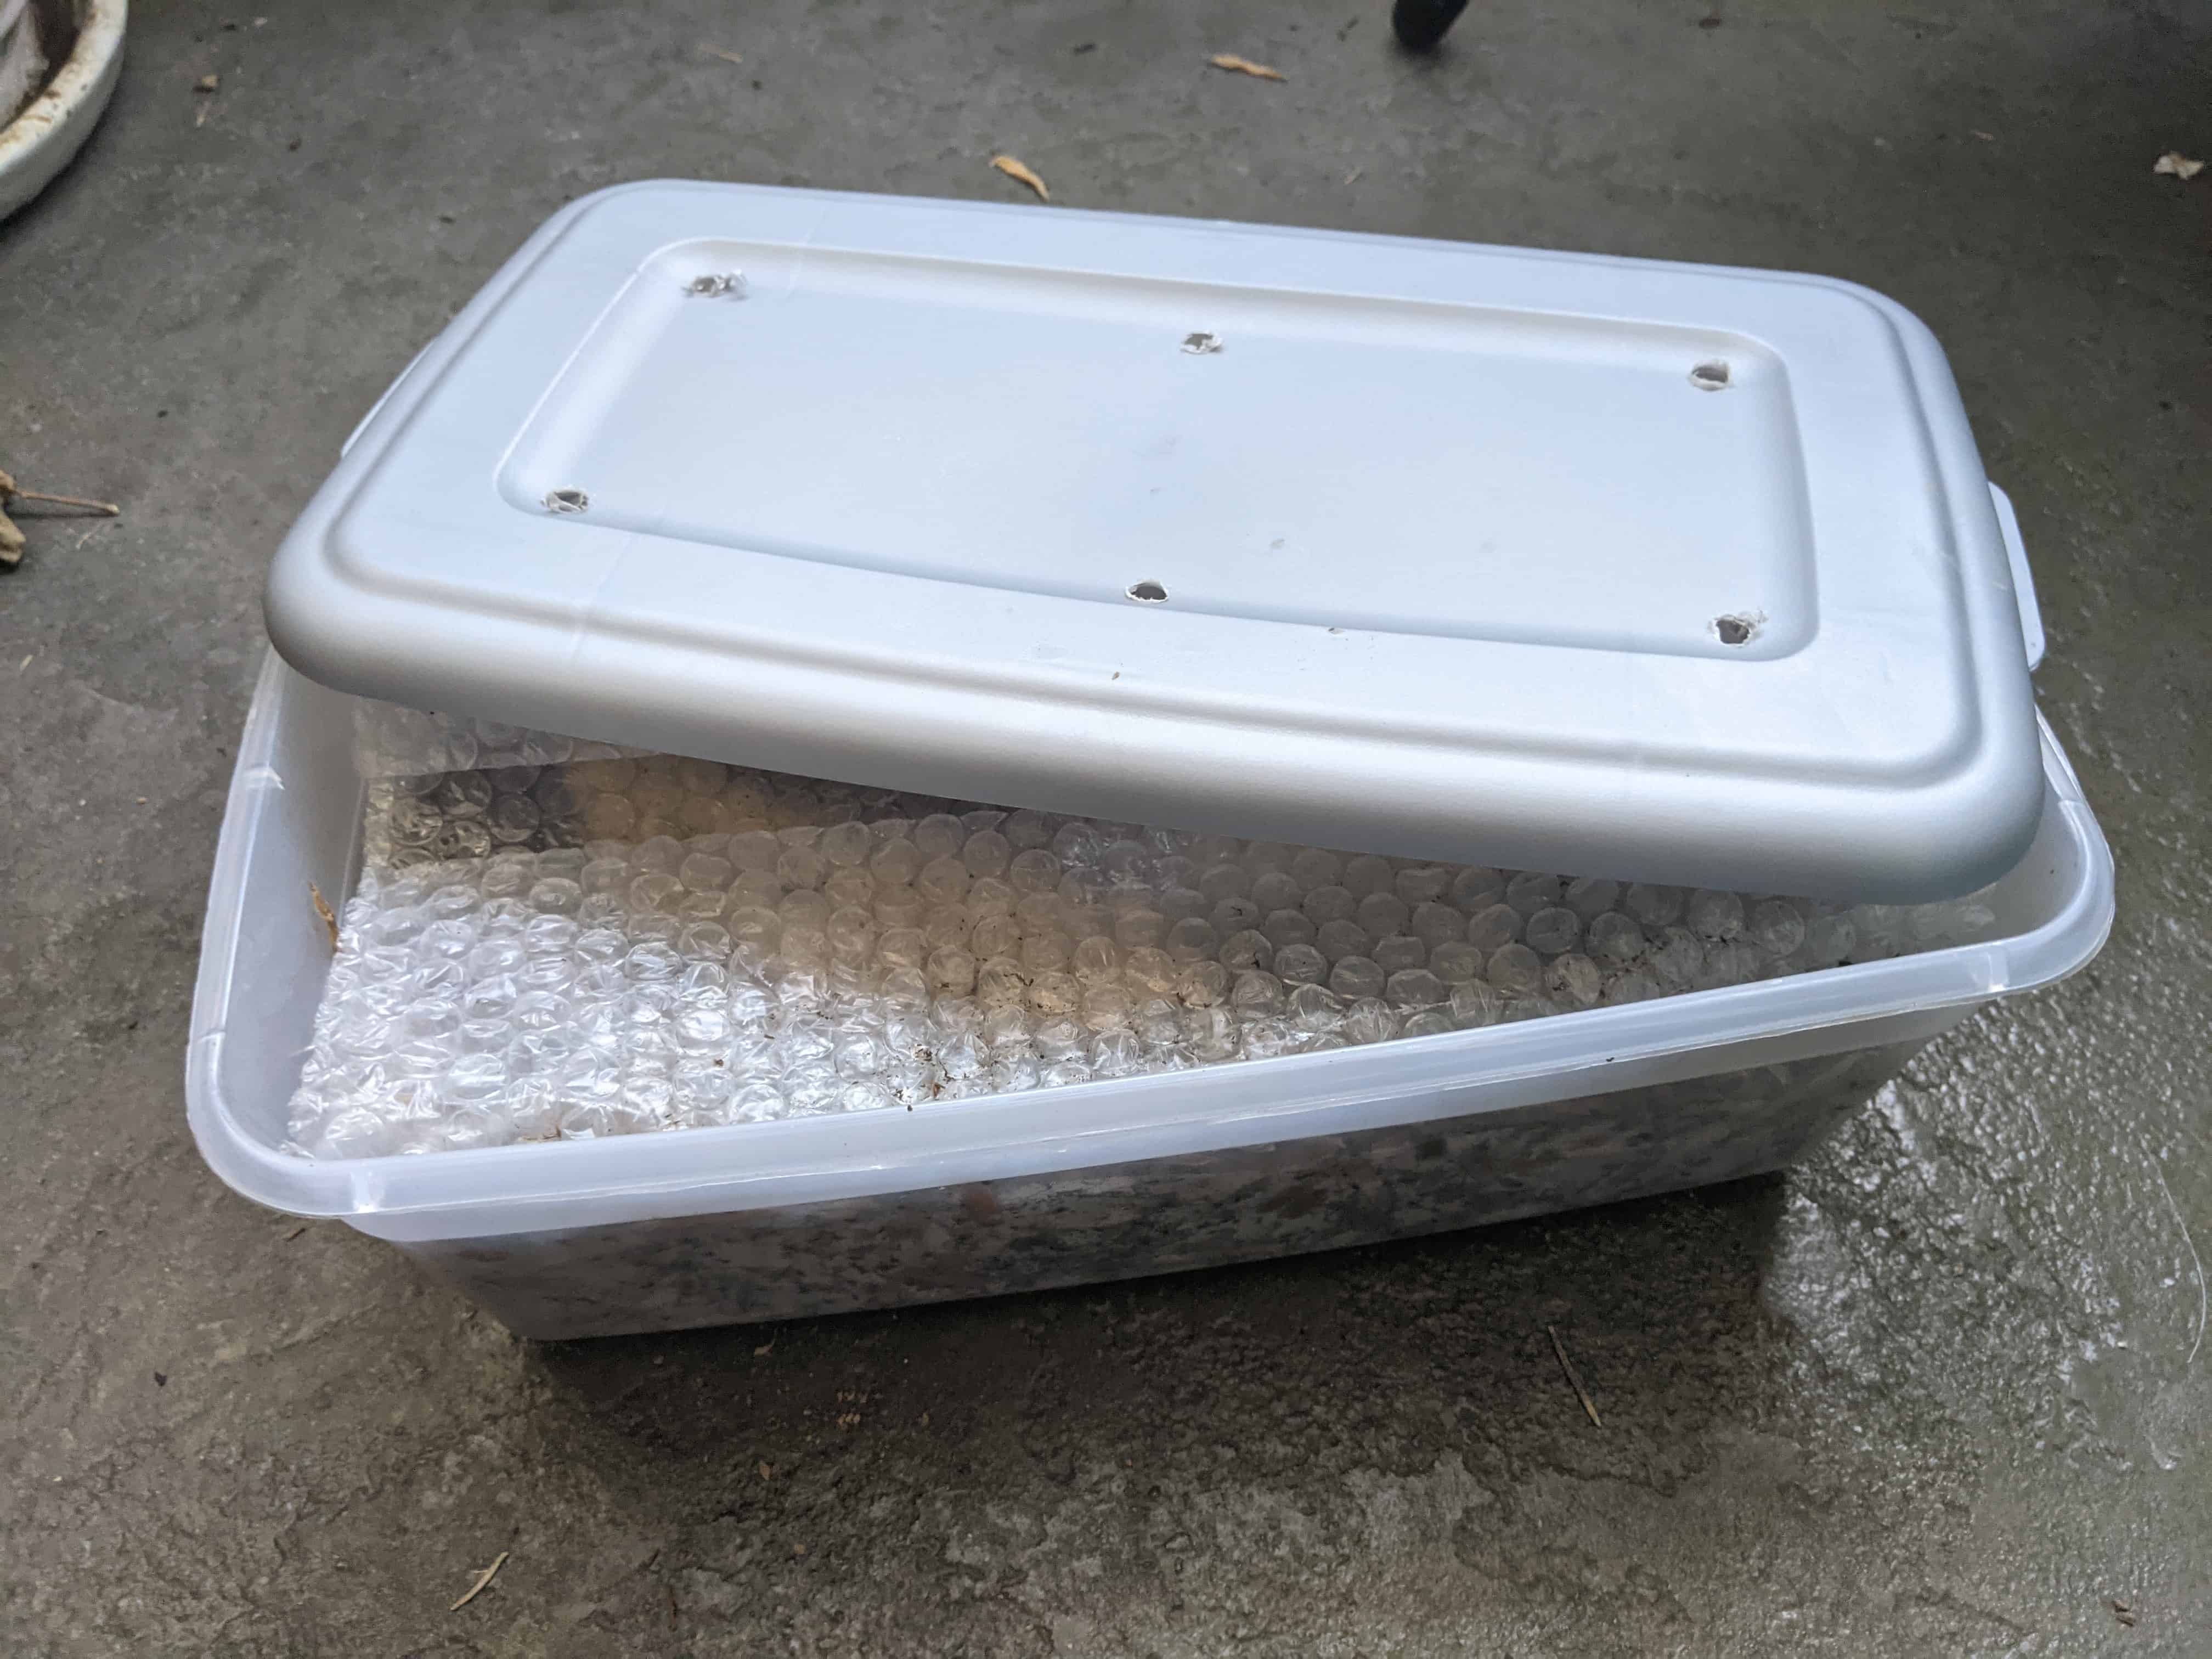 A shallow container with air holes for keeping worms.